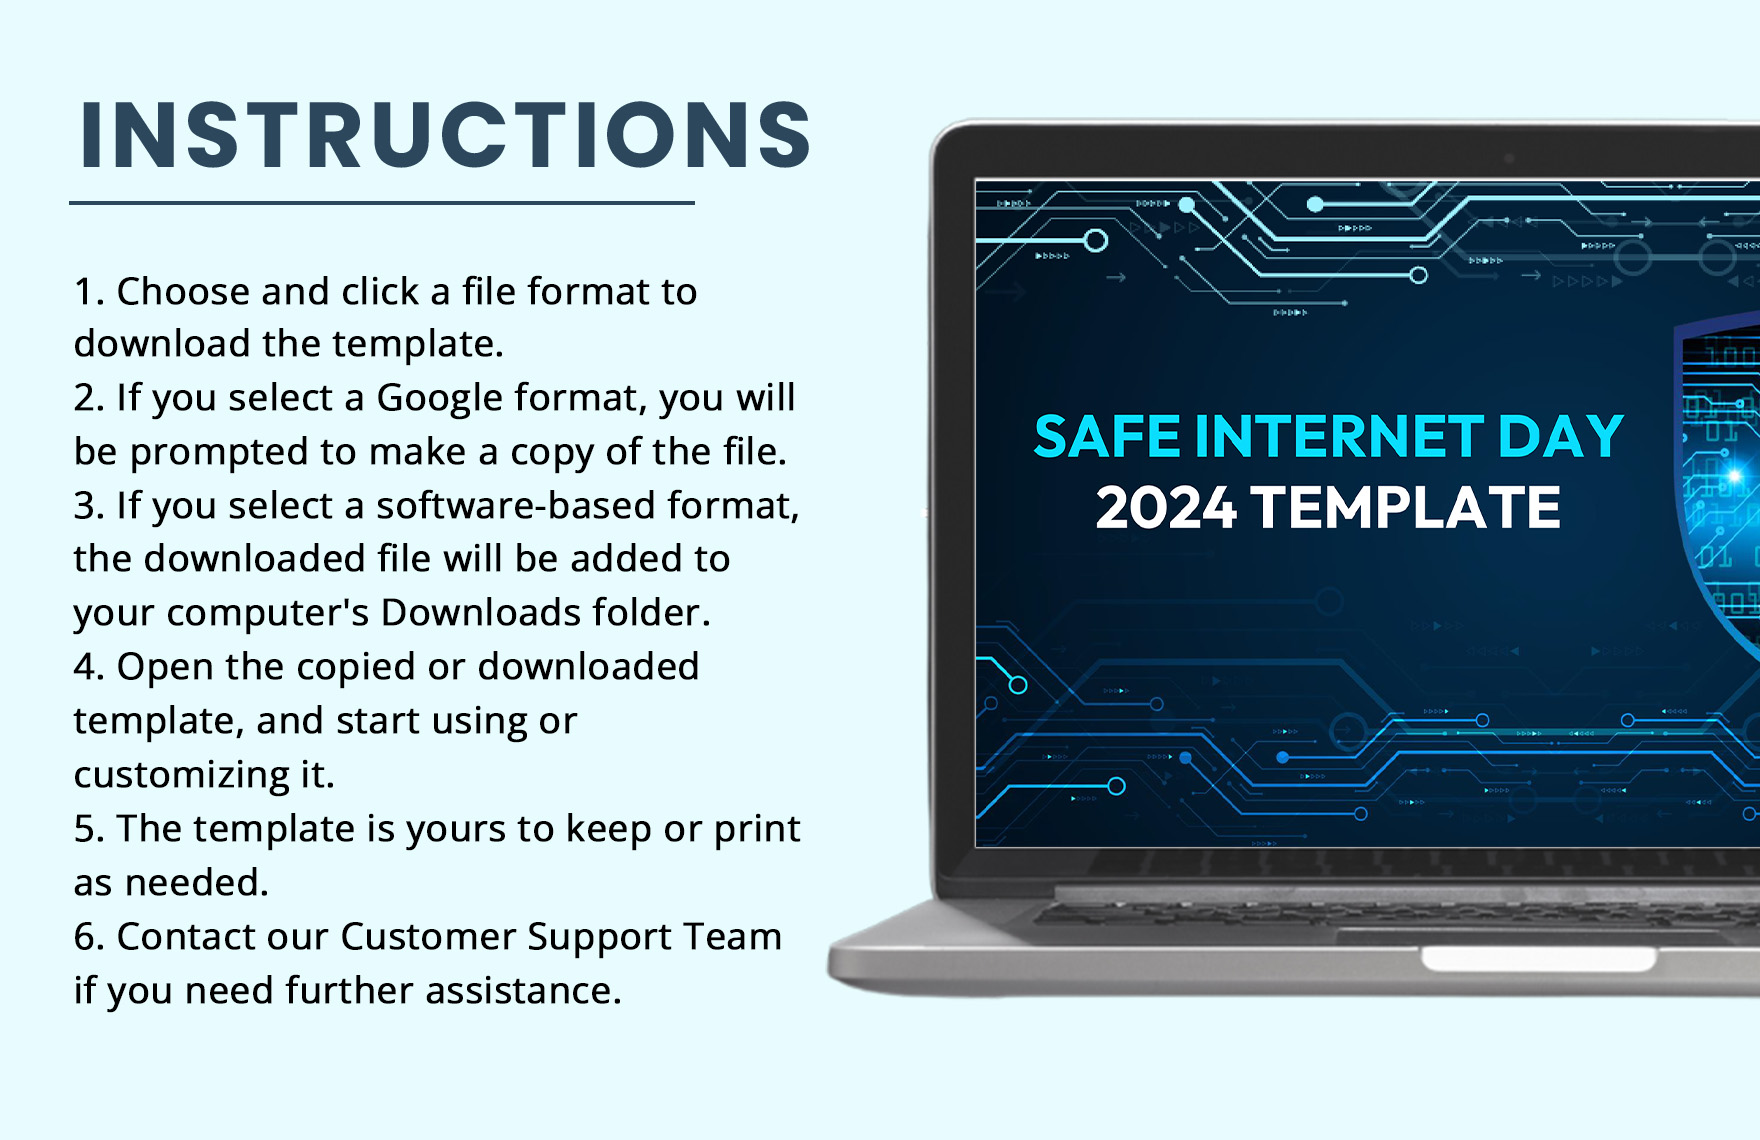 Safe Internet Day 2024 Template